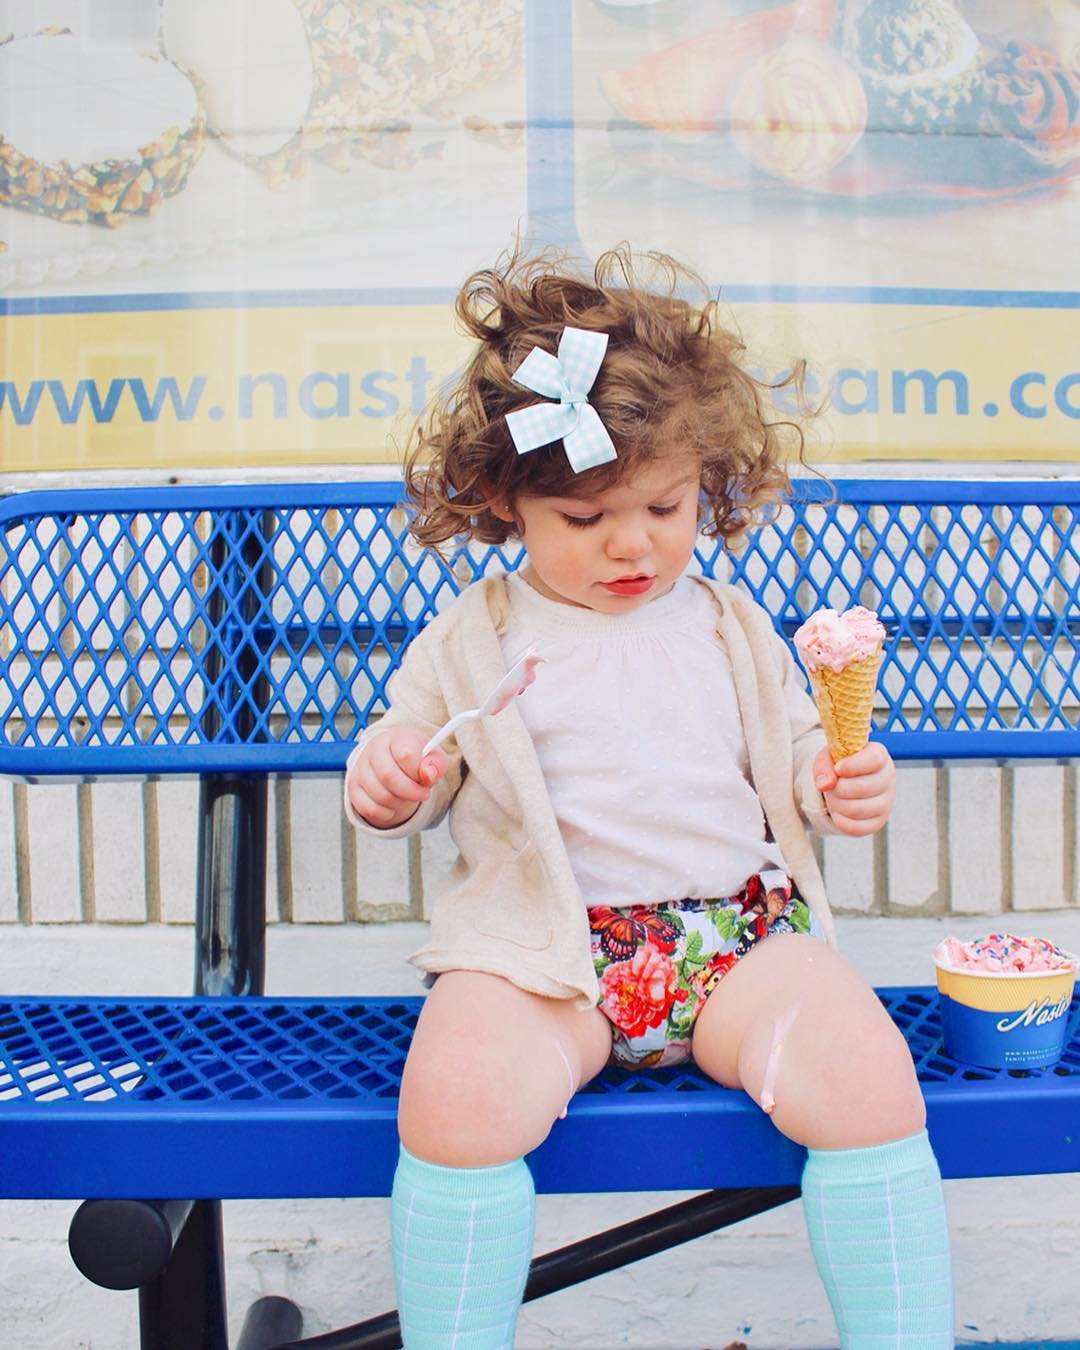 Young girl looking at ice cream dripping on her leg while holding an ice cream cone and spoon. Photo by Instagram user @kathleen_templeton